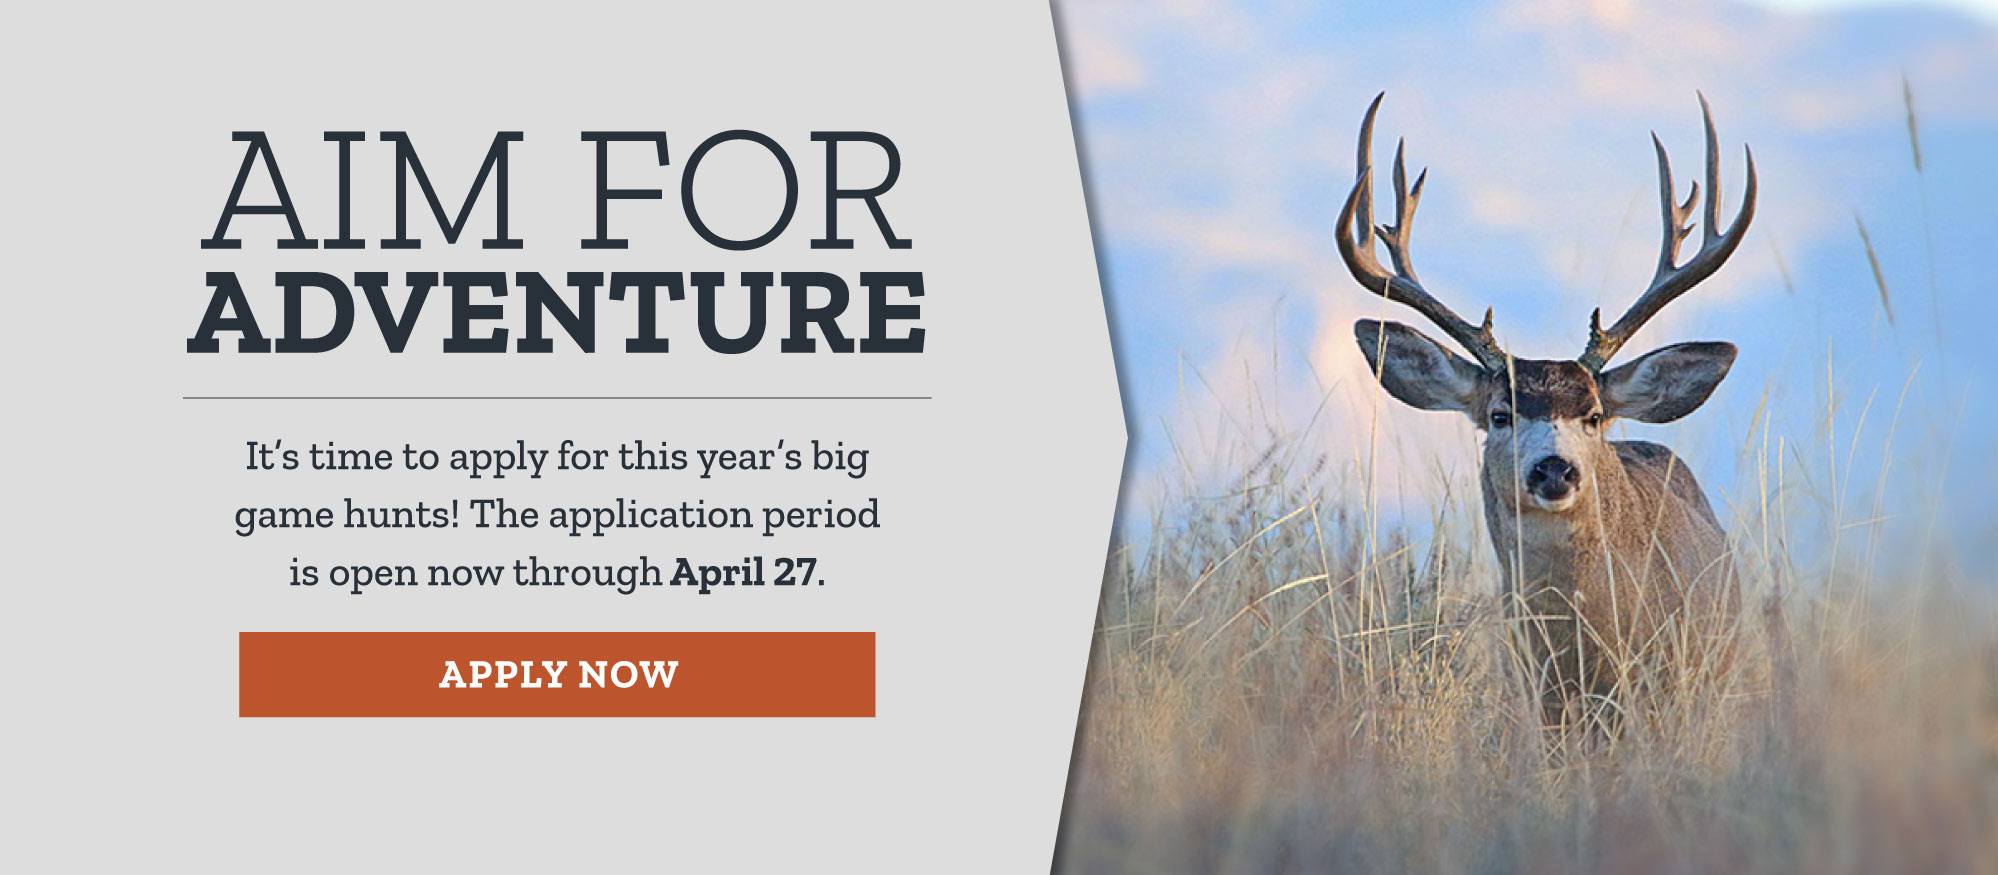 Aim for adventure: 2023 Big Game Application Dates